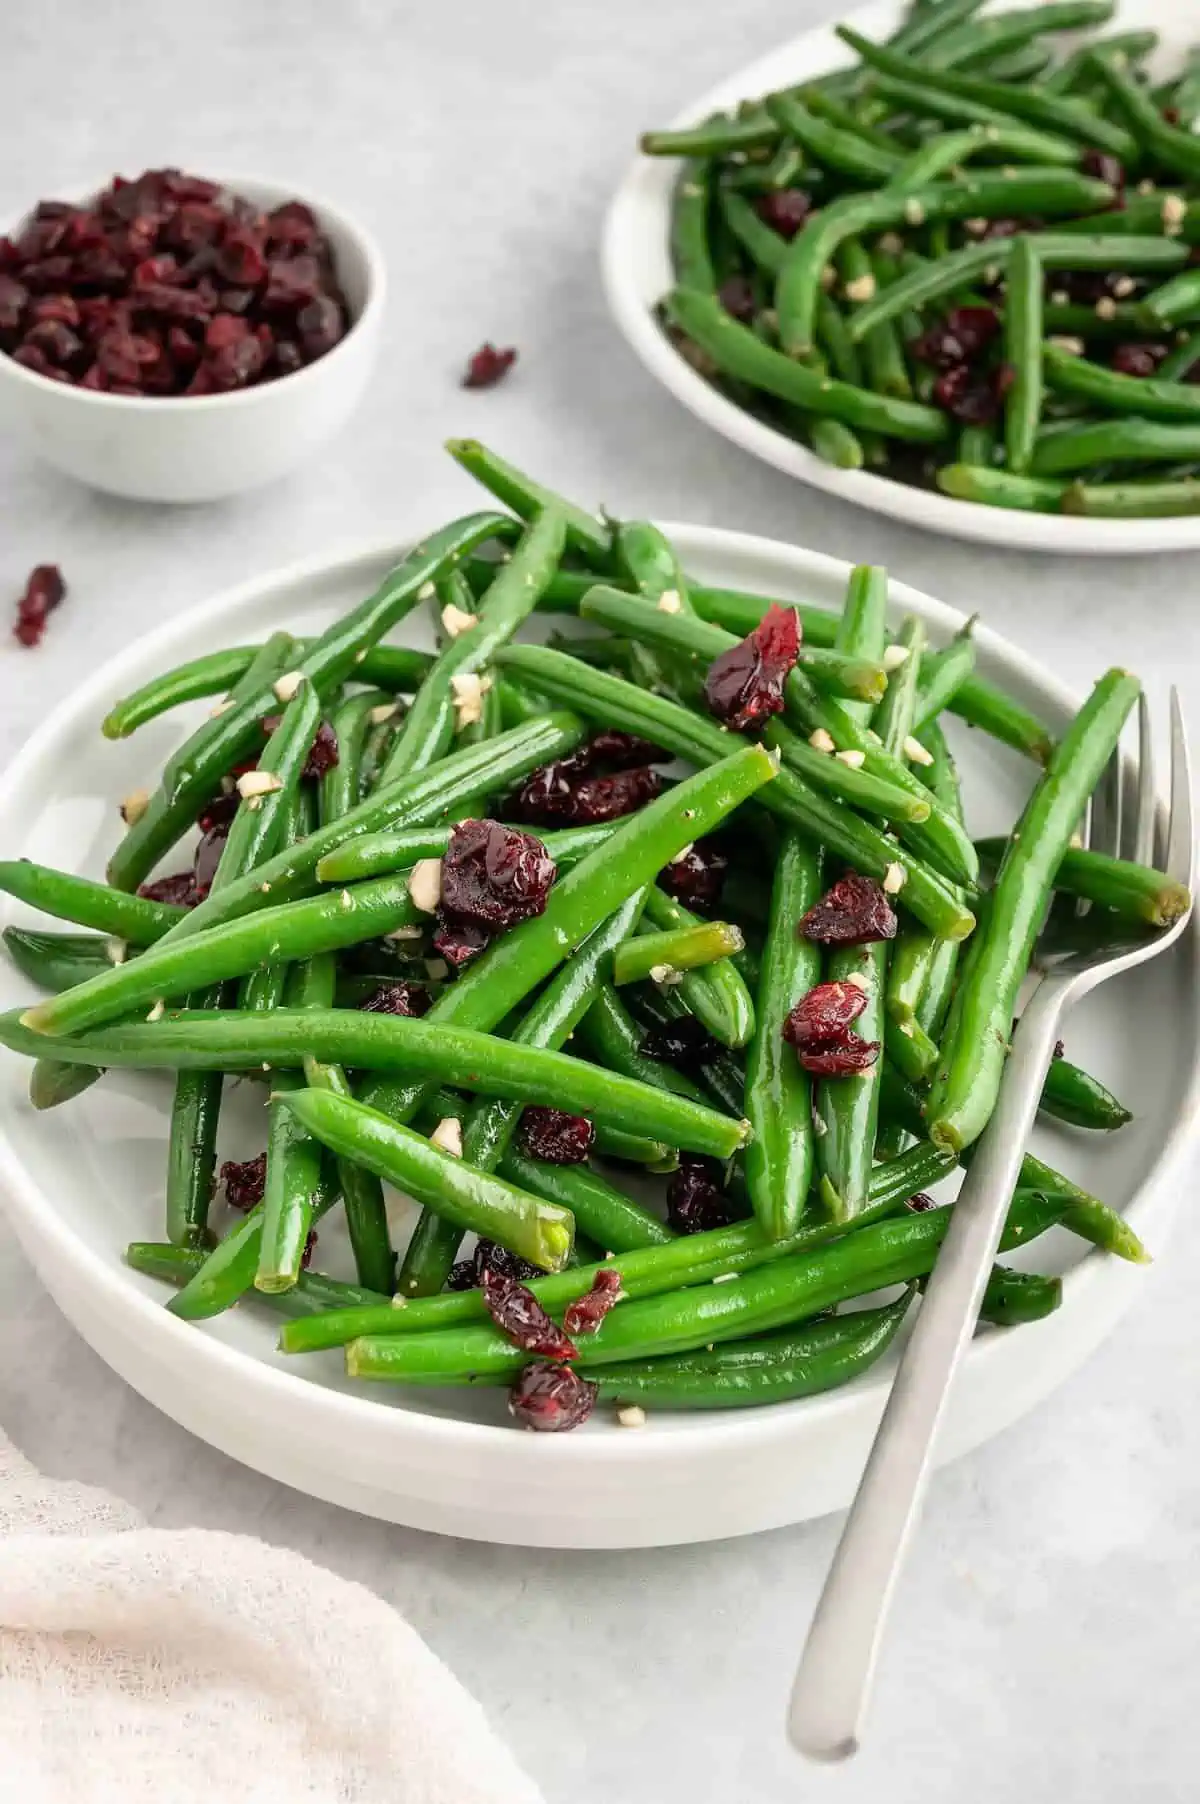 A plate of garlic green beans on a white plate with a fork.